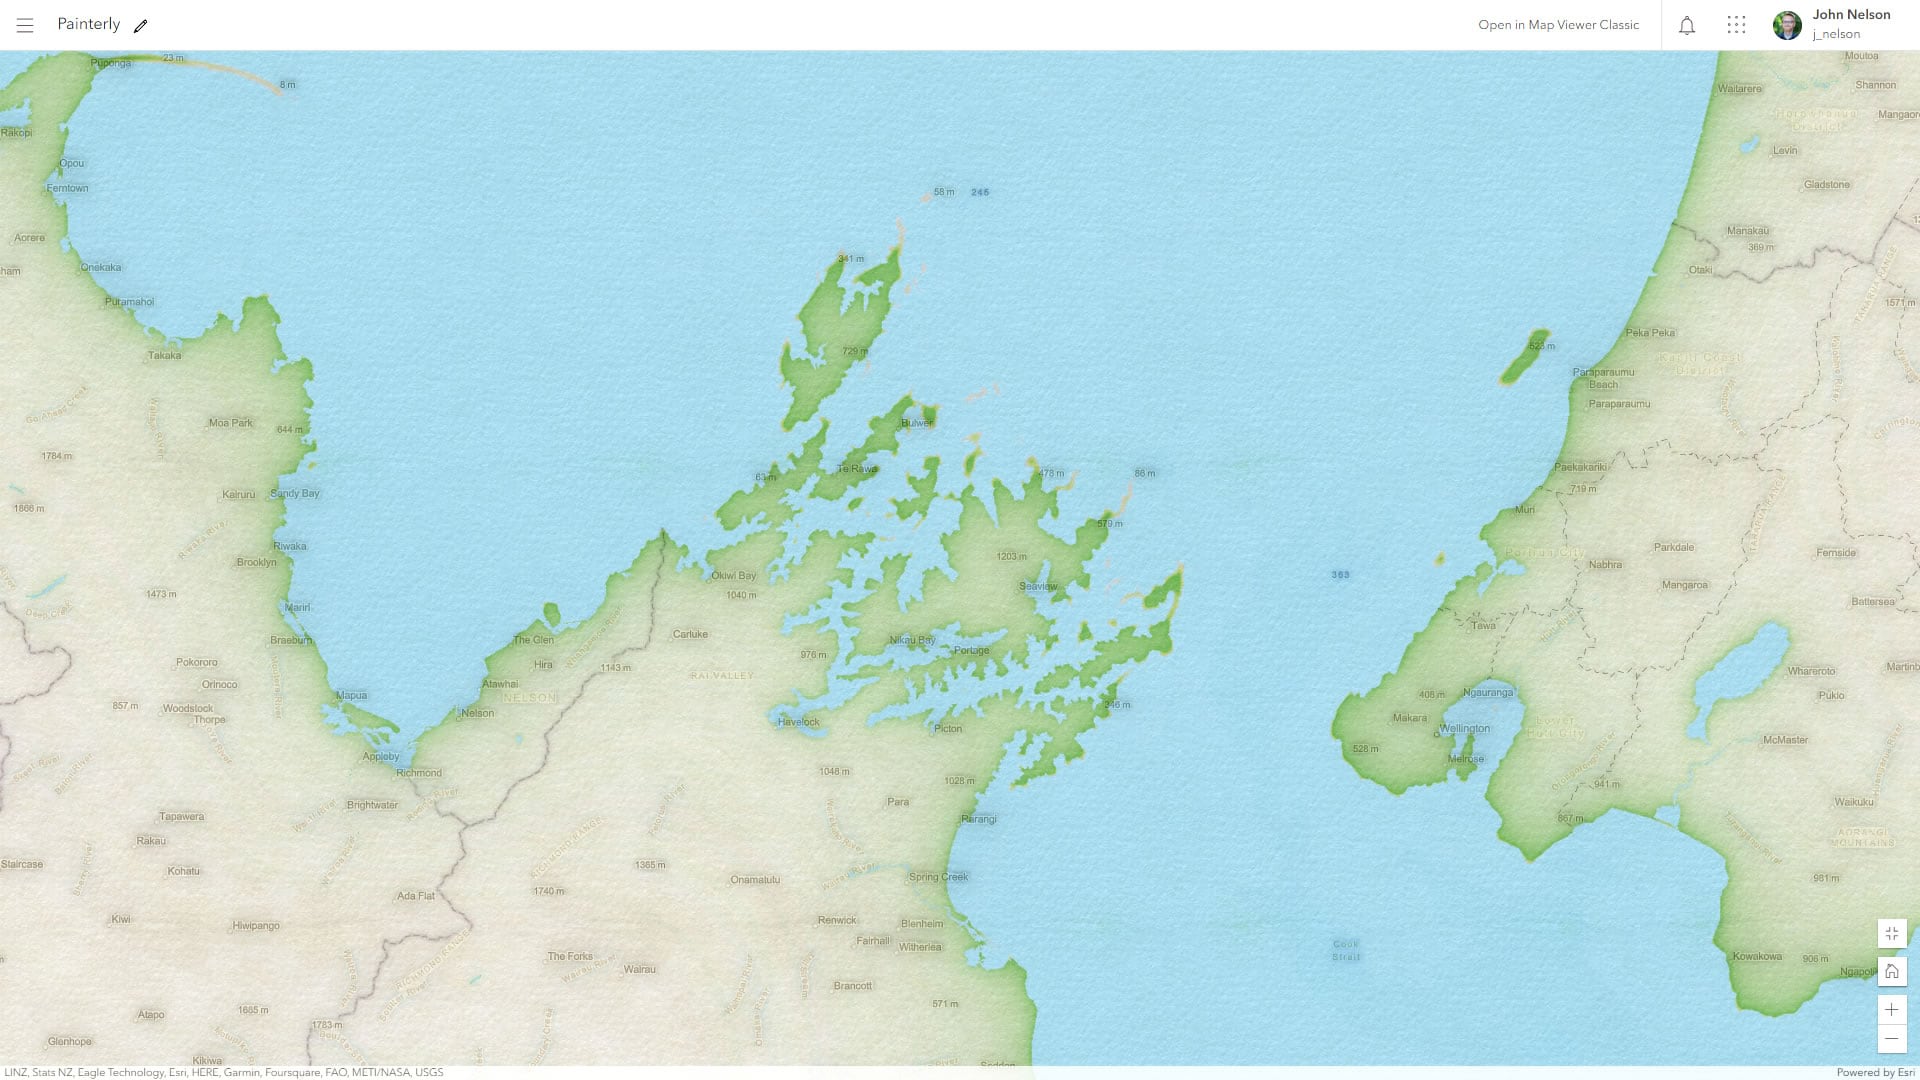 Painterly basemap in ArcGIS Online